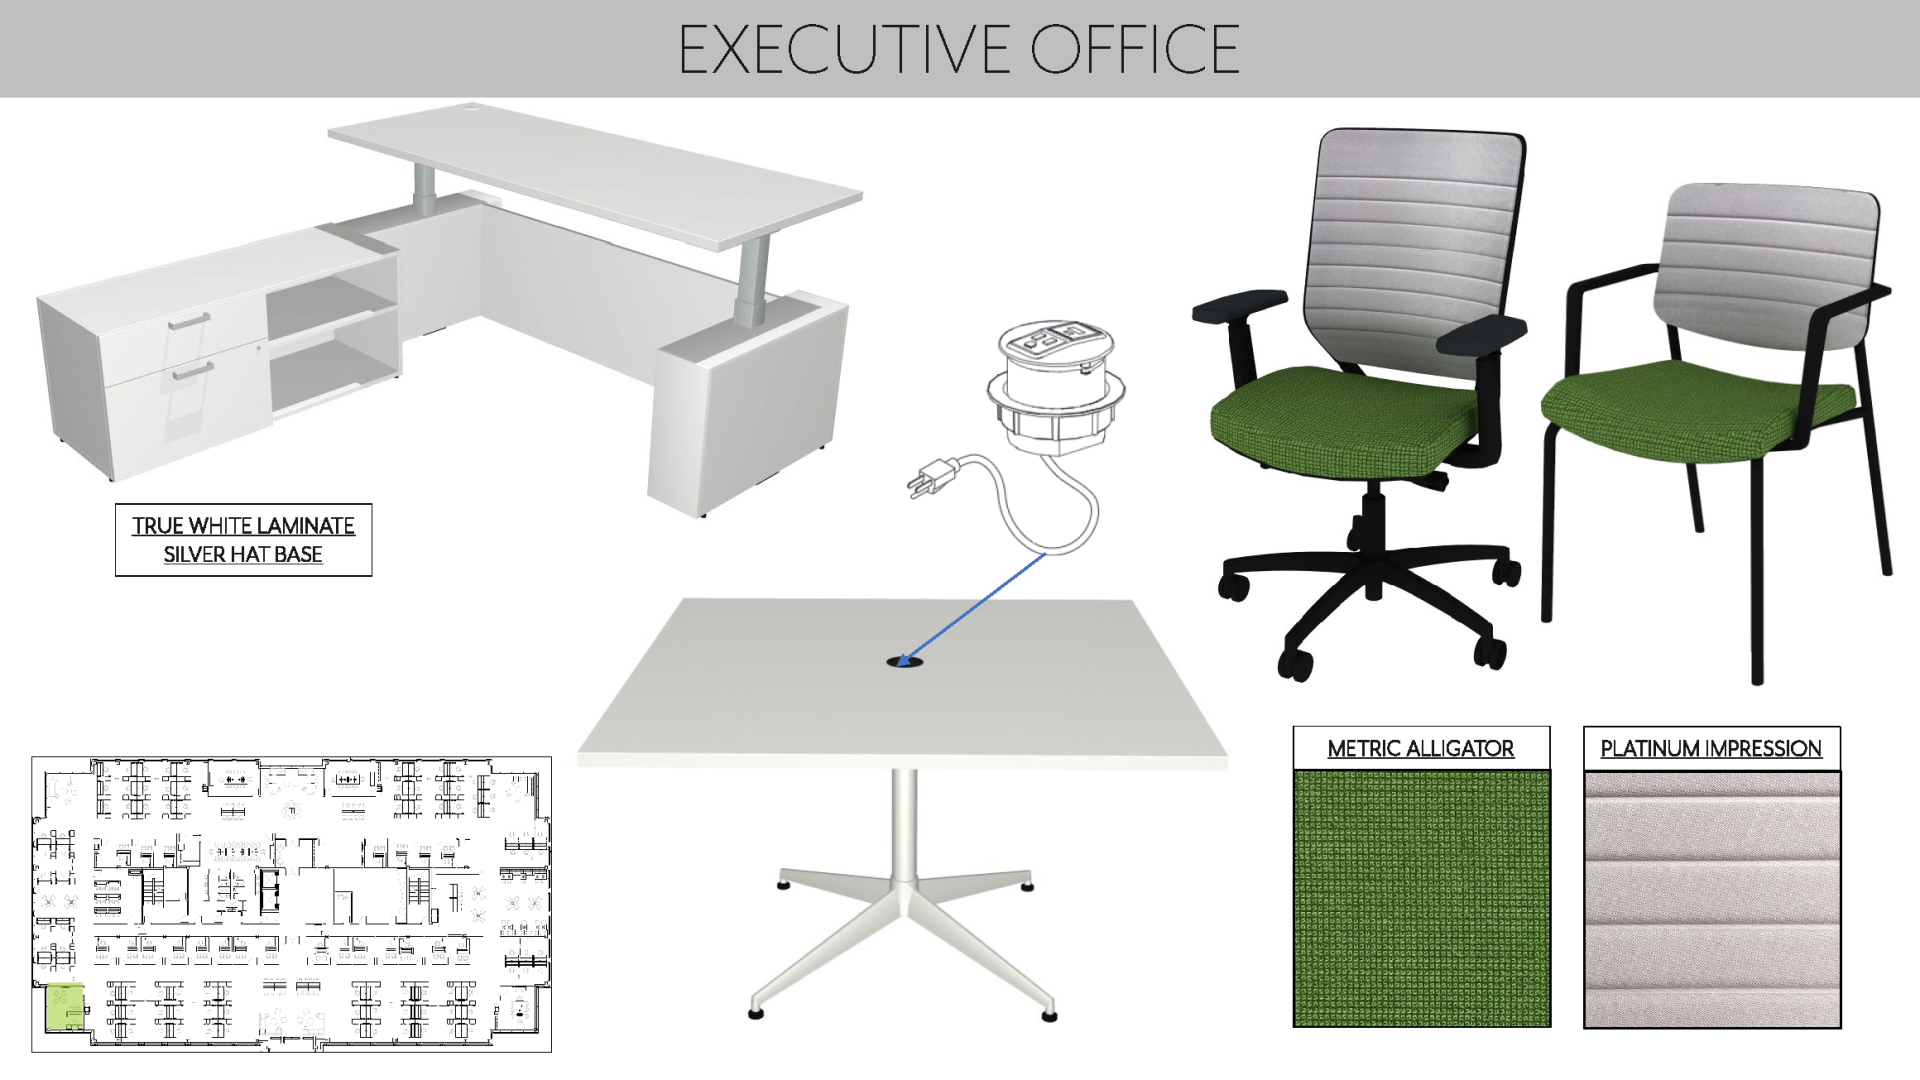 Executive office layout